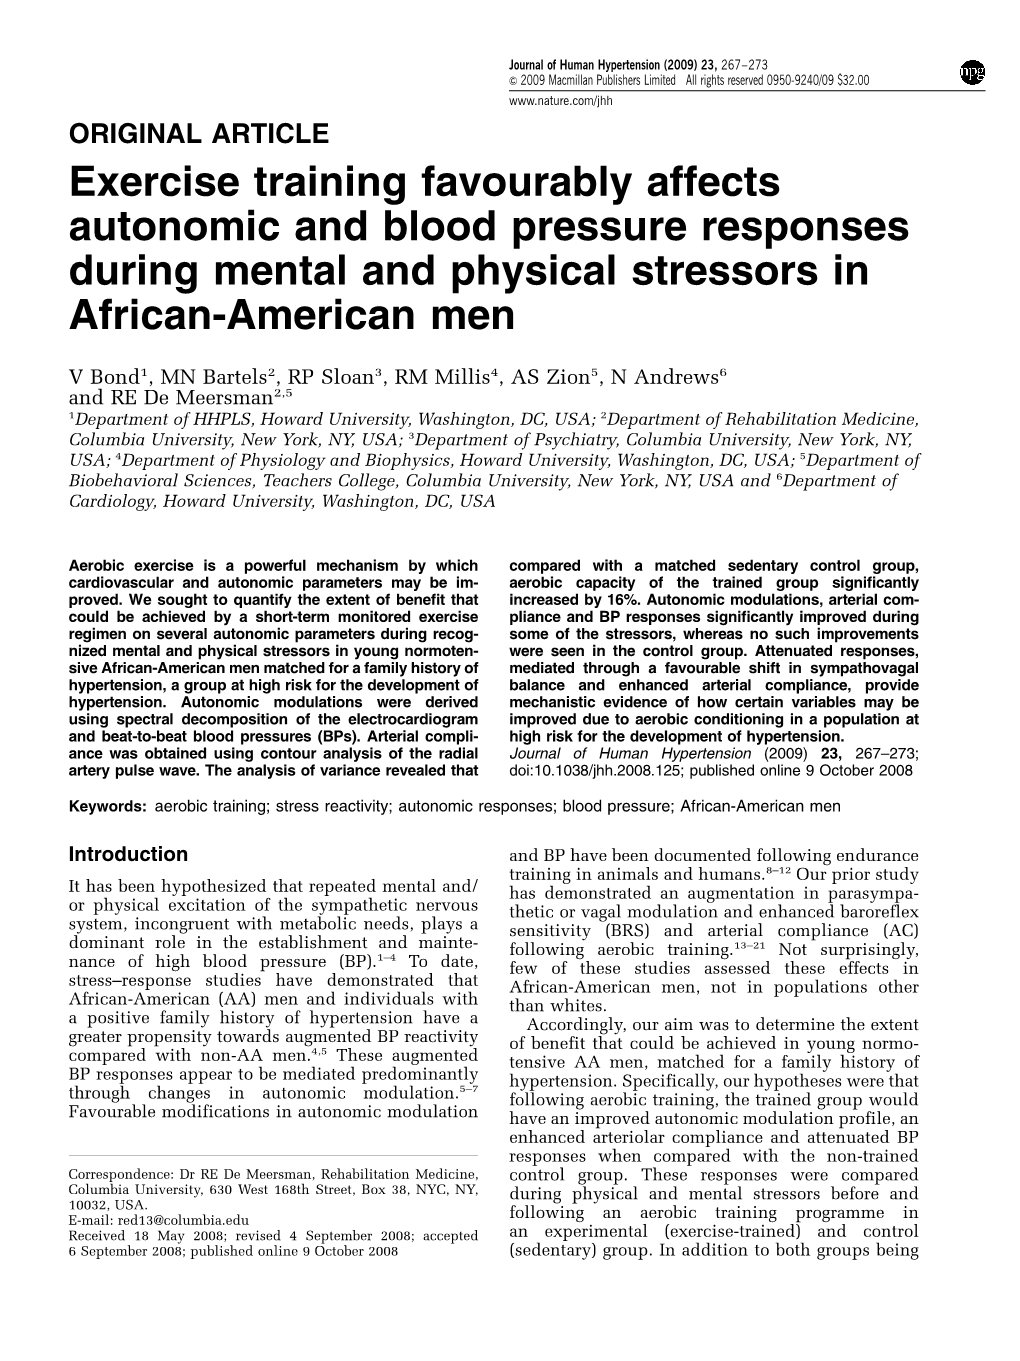 Exercise Training Favourably Affects Autonomic and Blood Pressure Responses During Mental and Physical Stressors in African-American Men